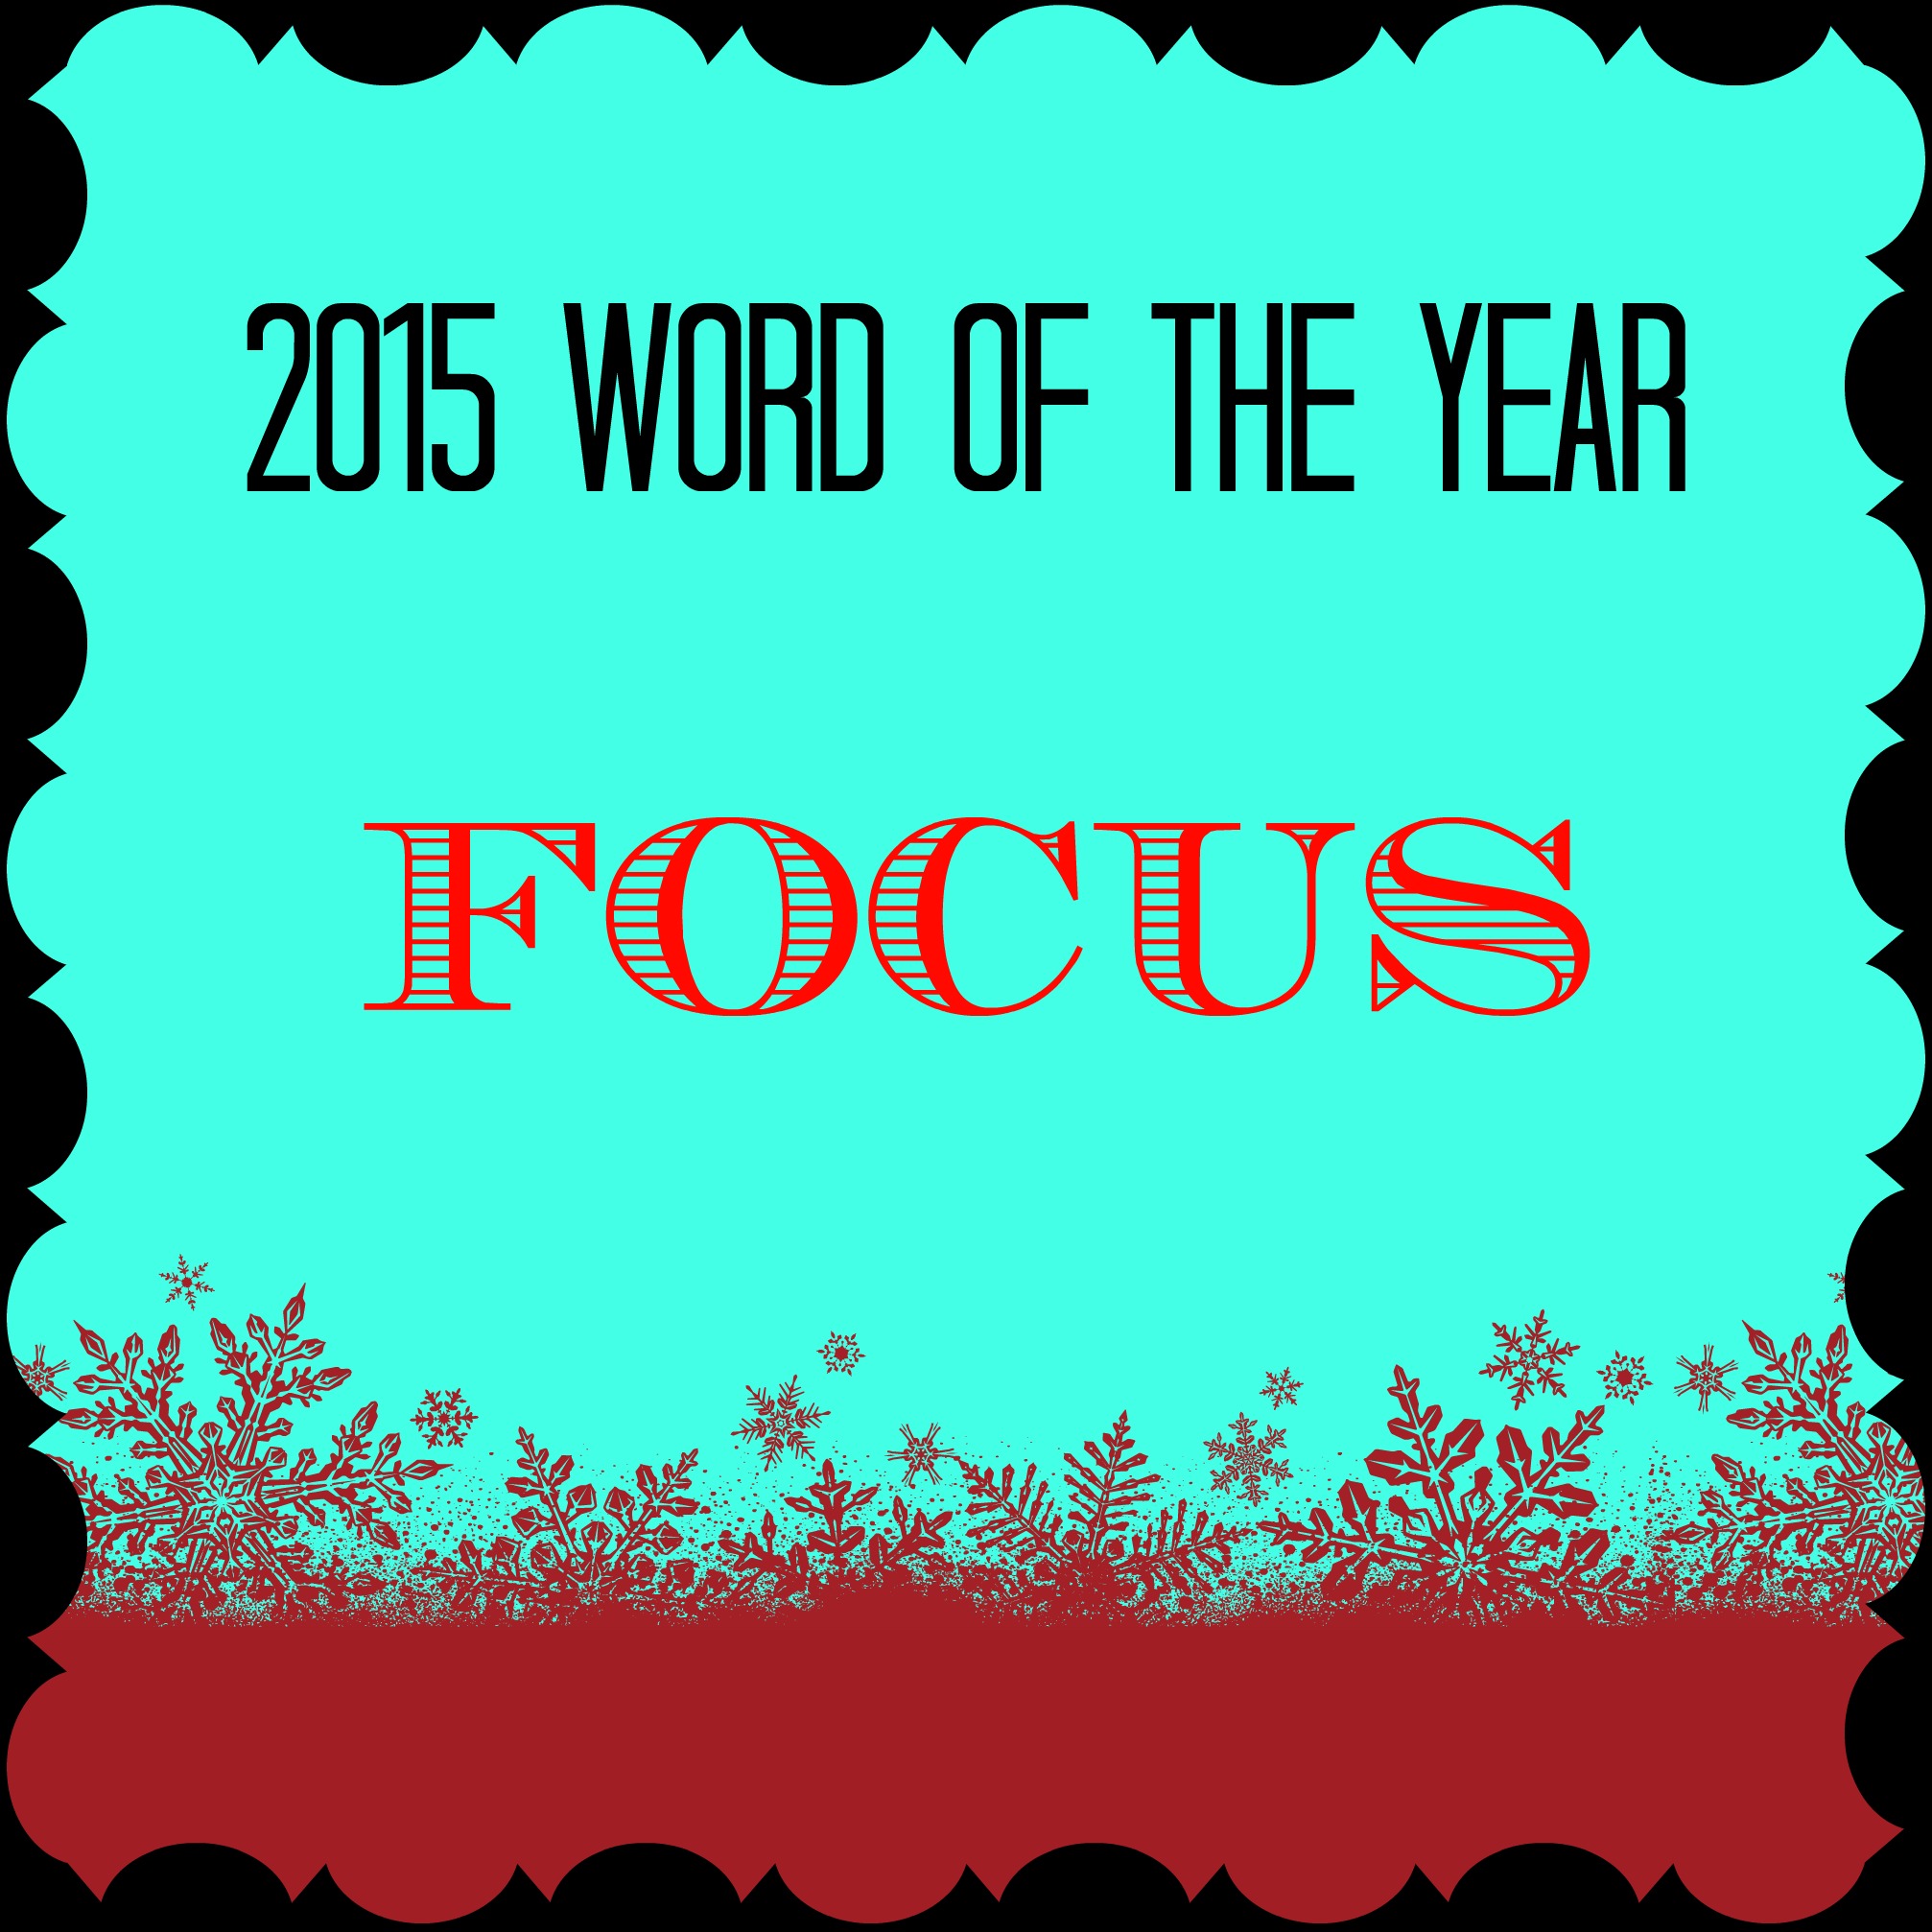 word of the year 2015